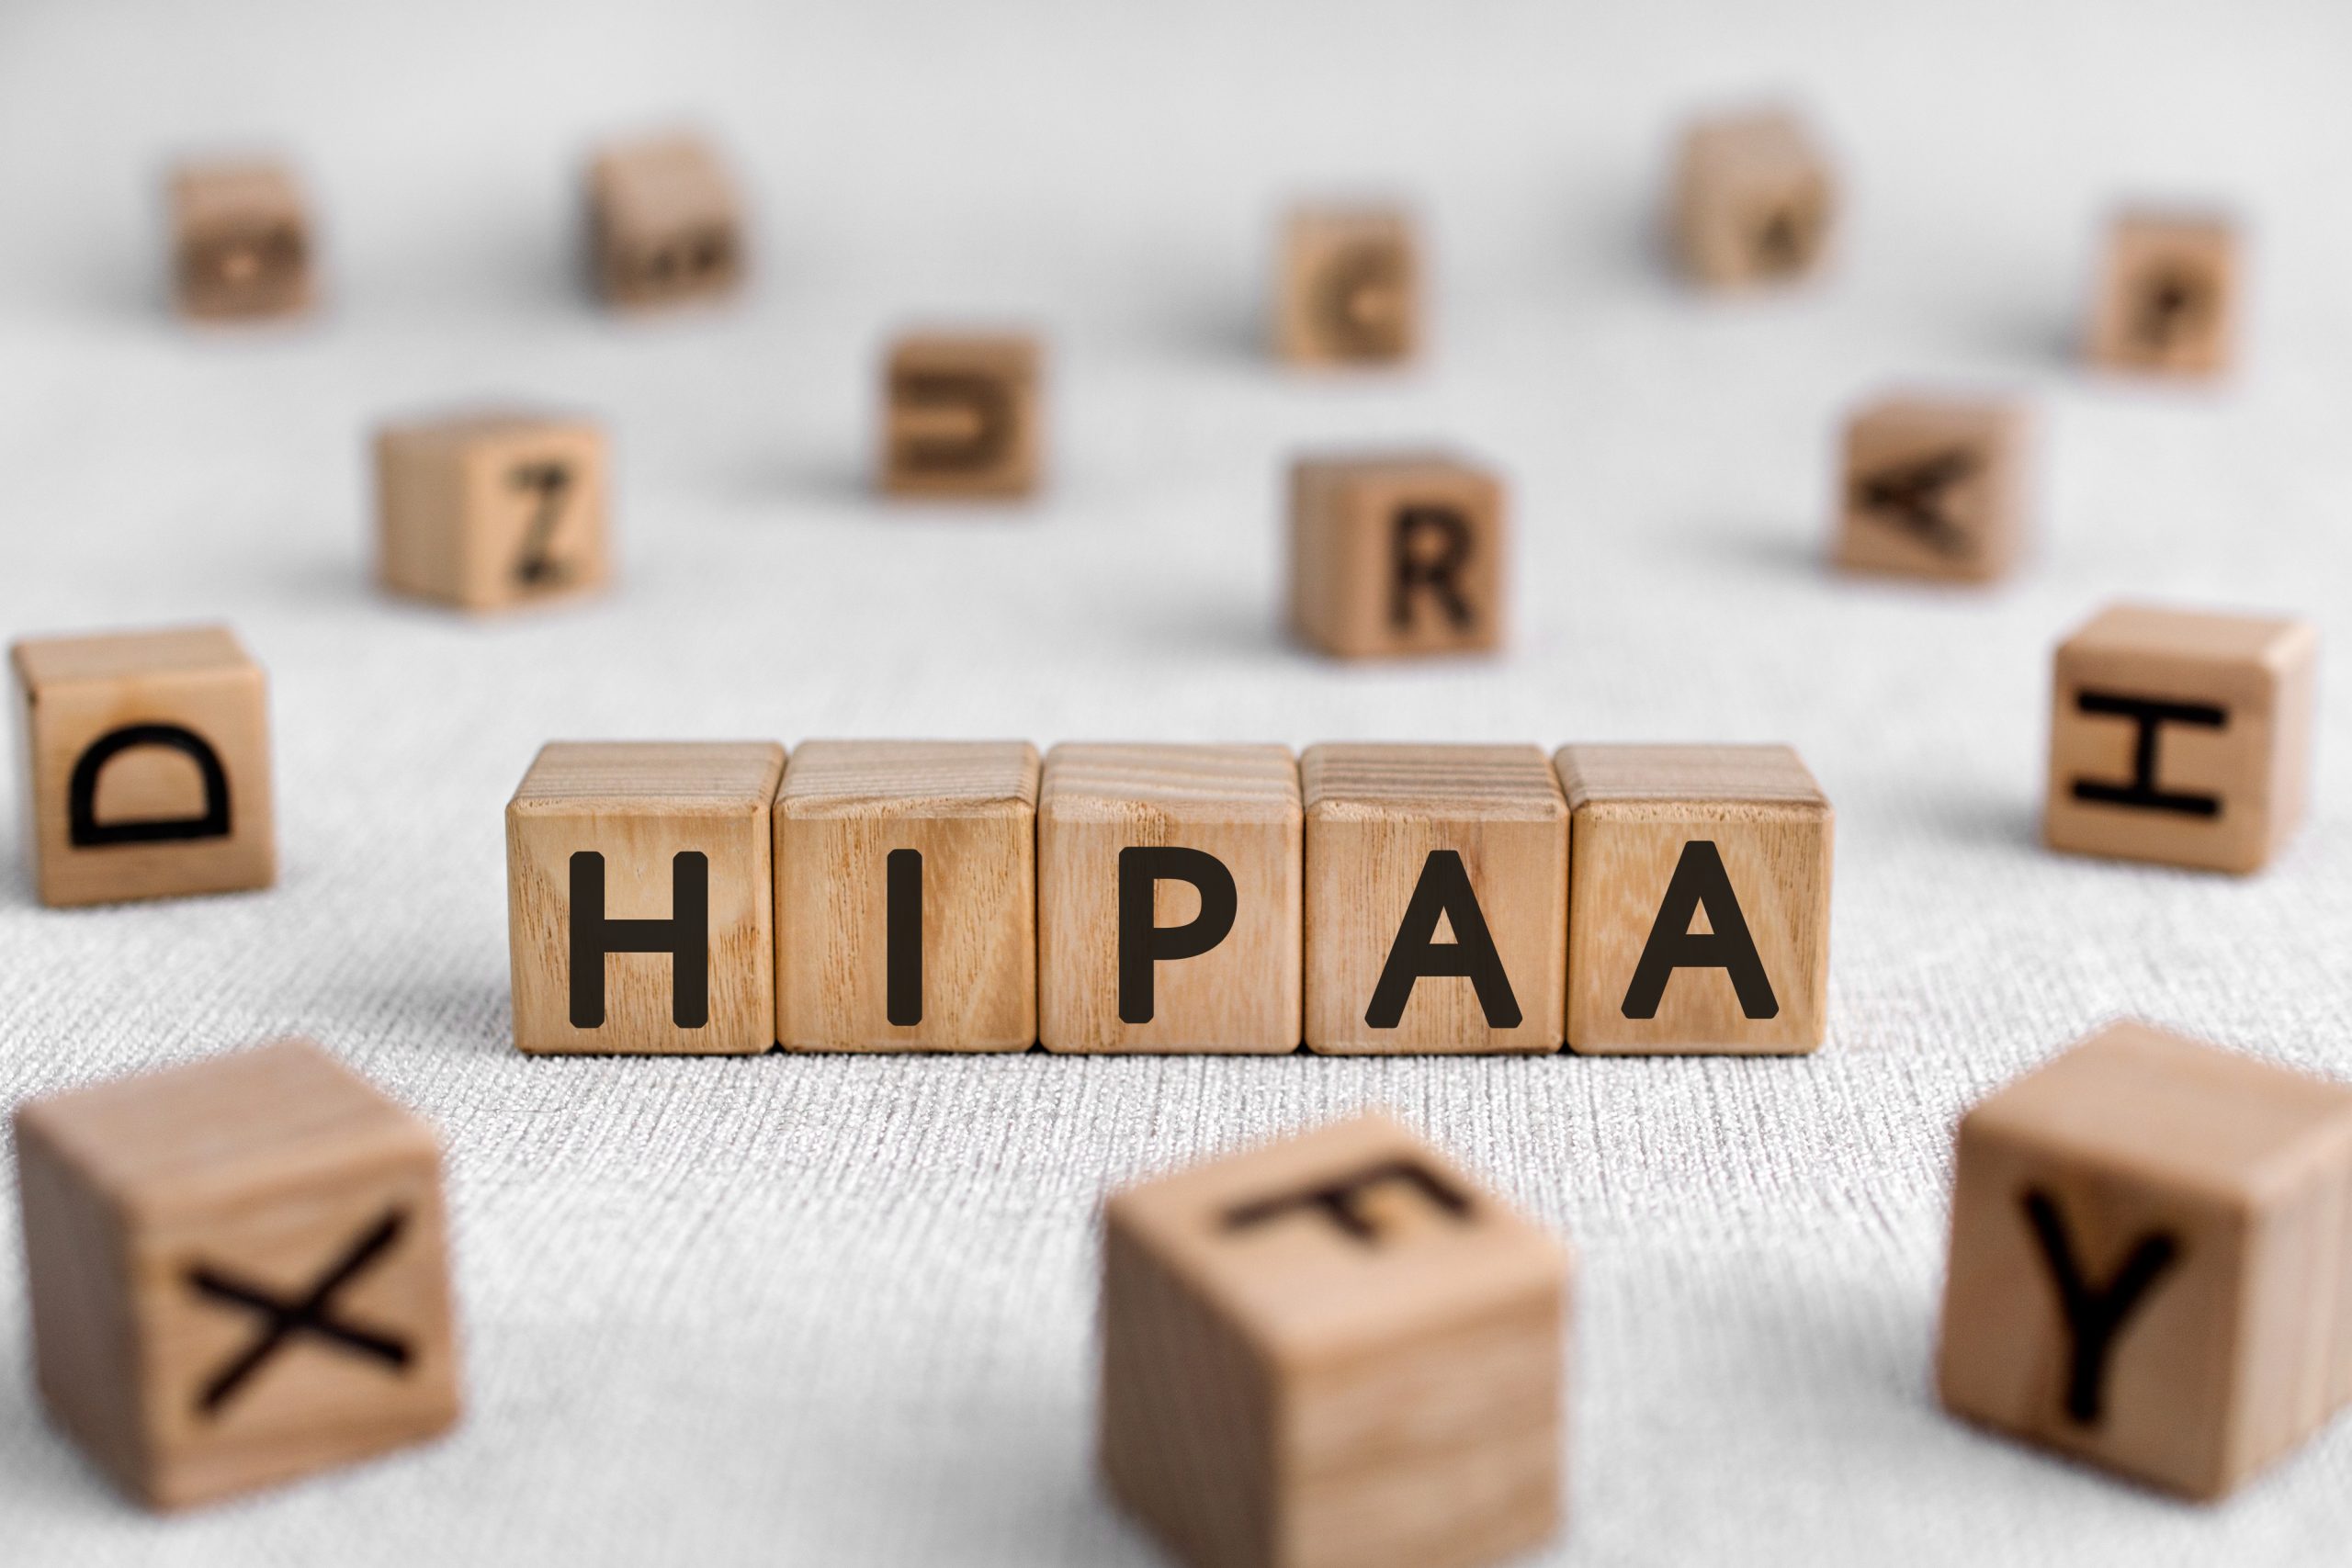 HIPAA spelled in building blocks to show HIPAA compliant texting